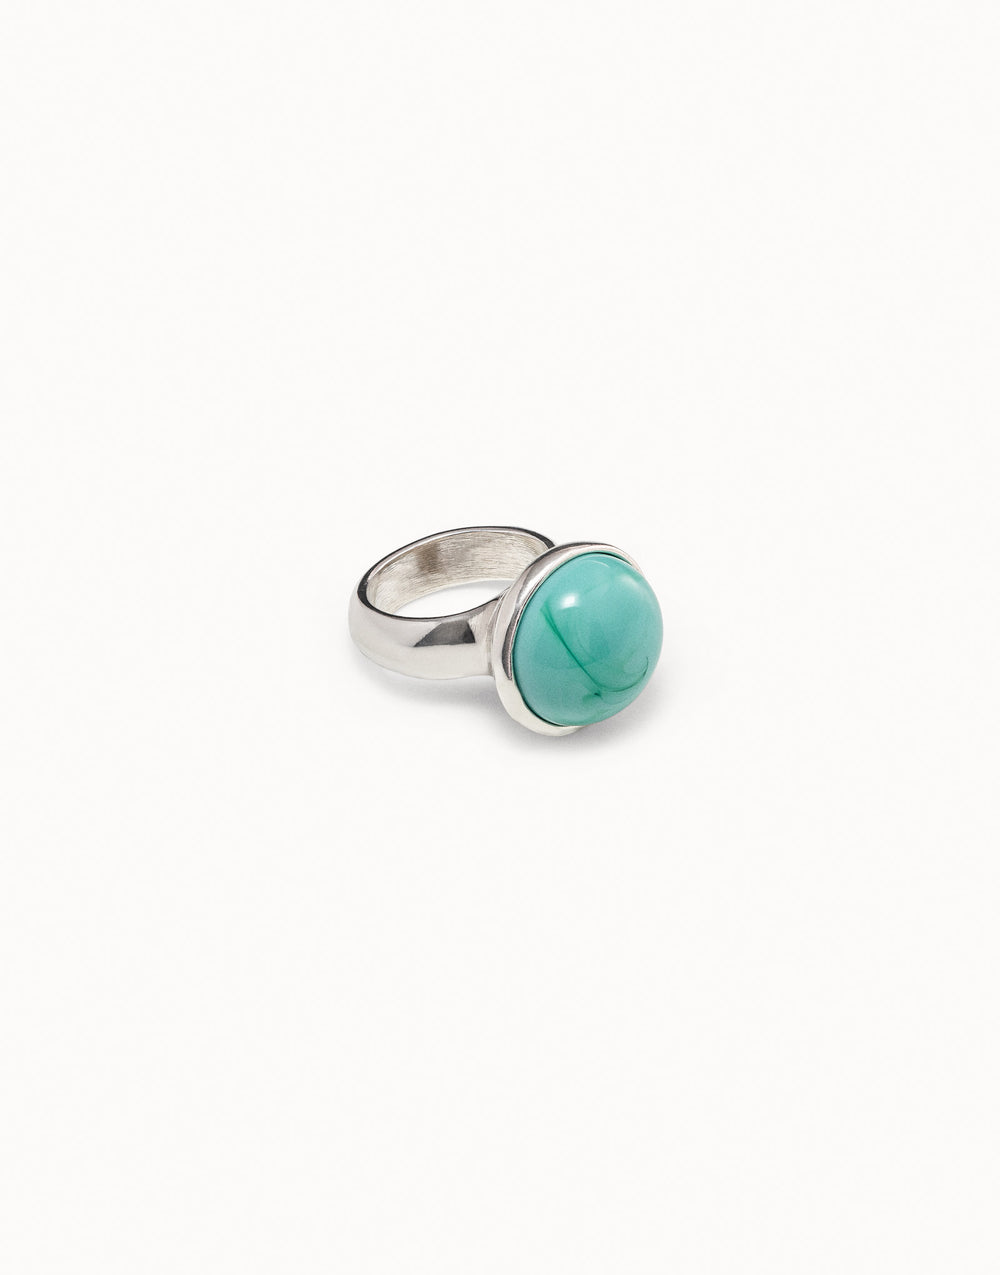 FLASHY RING - Kingfisher Road - Online Boutique